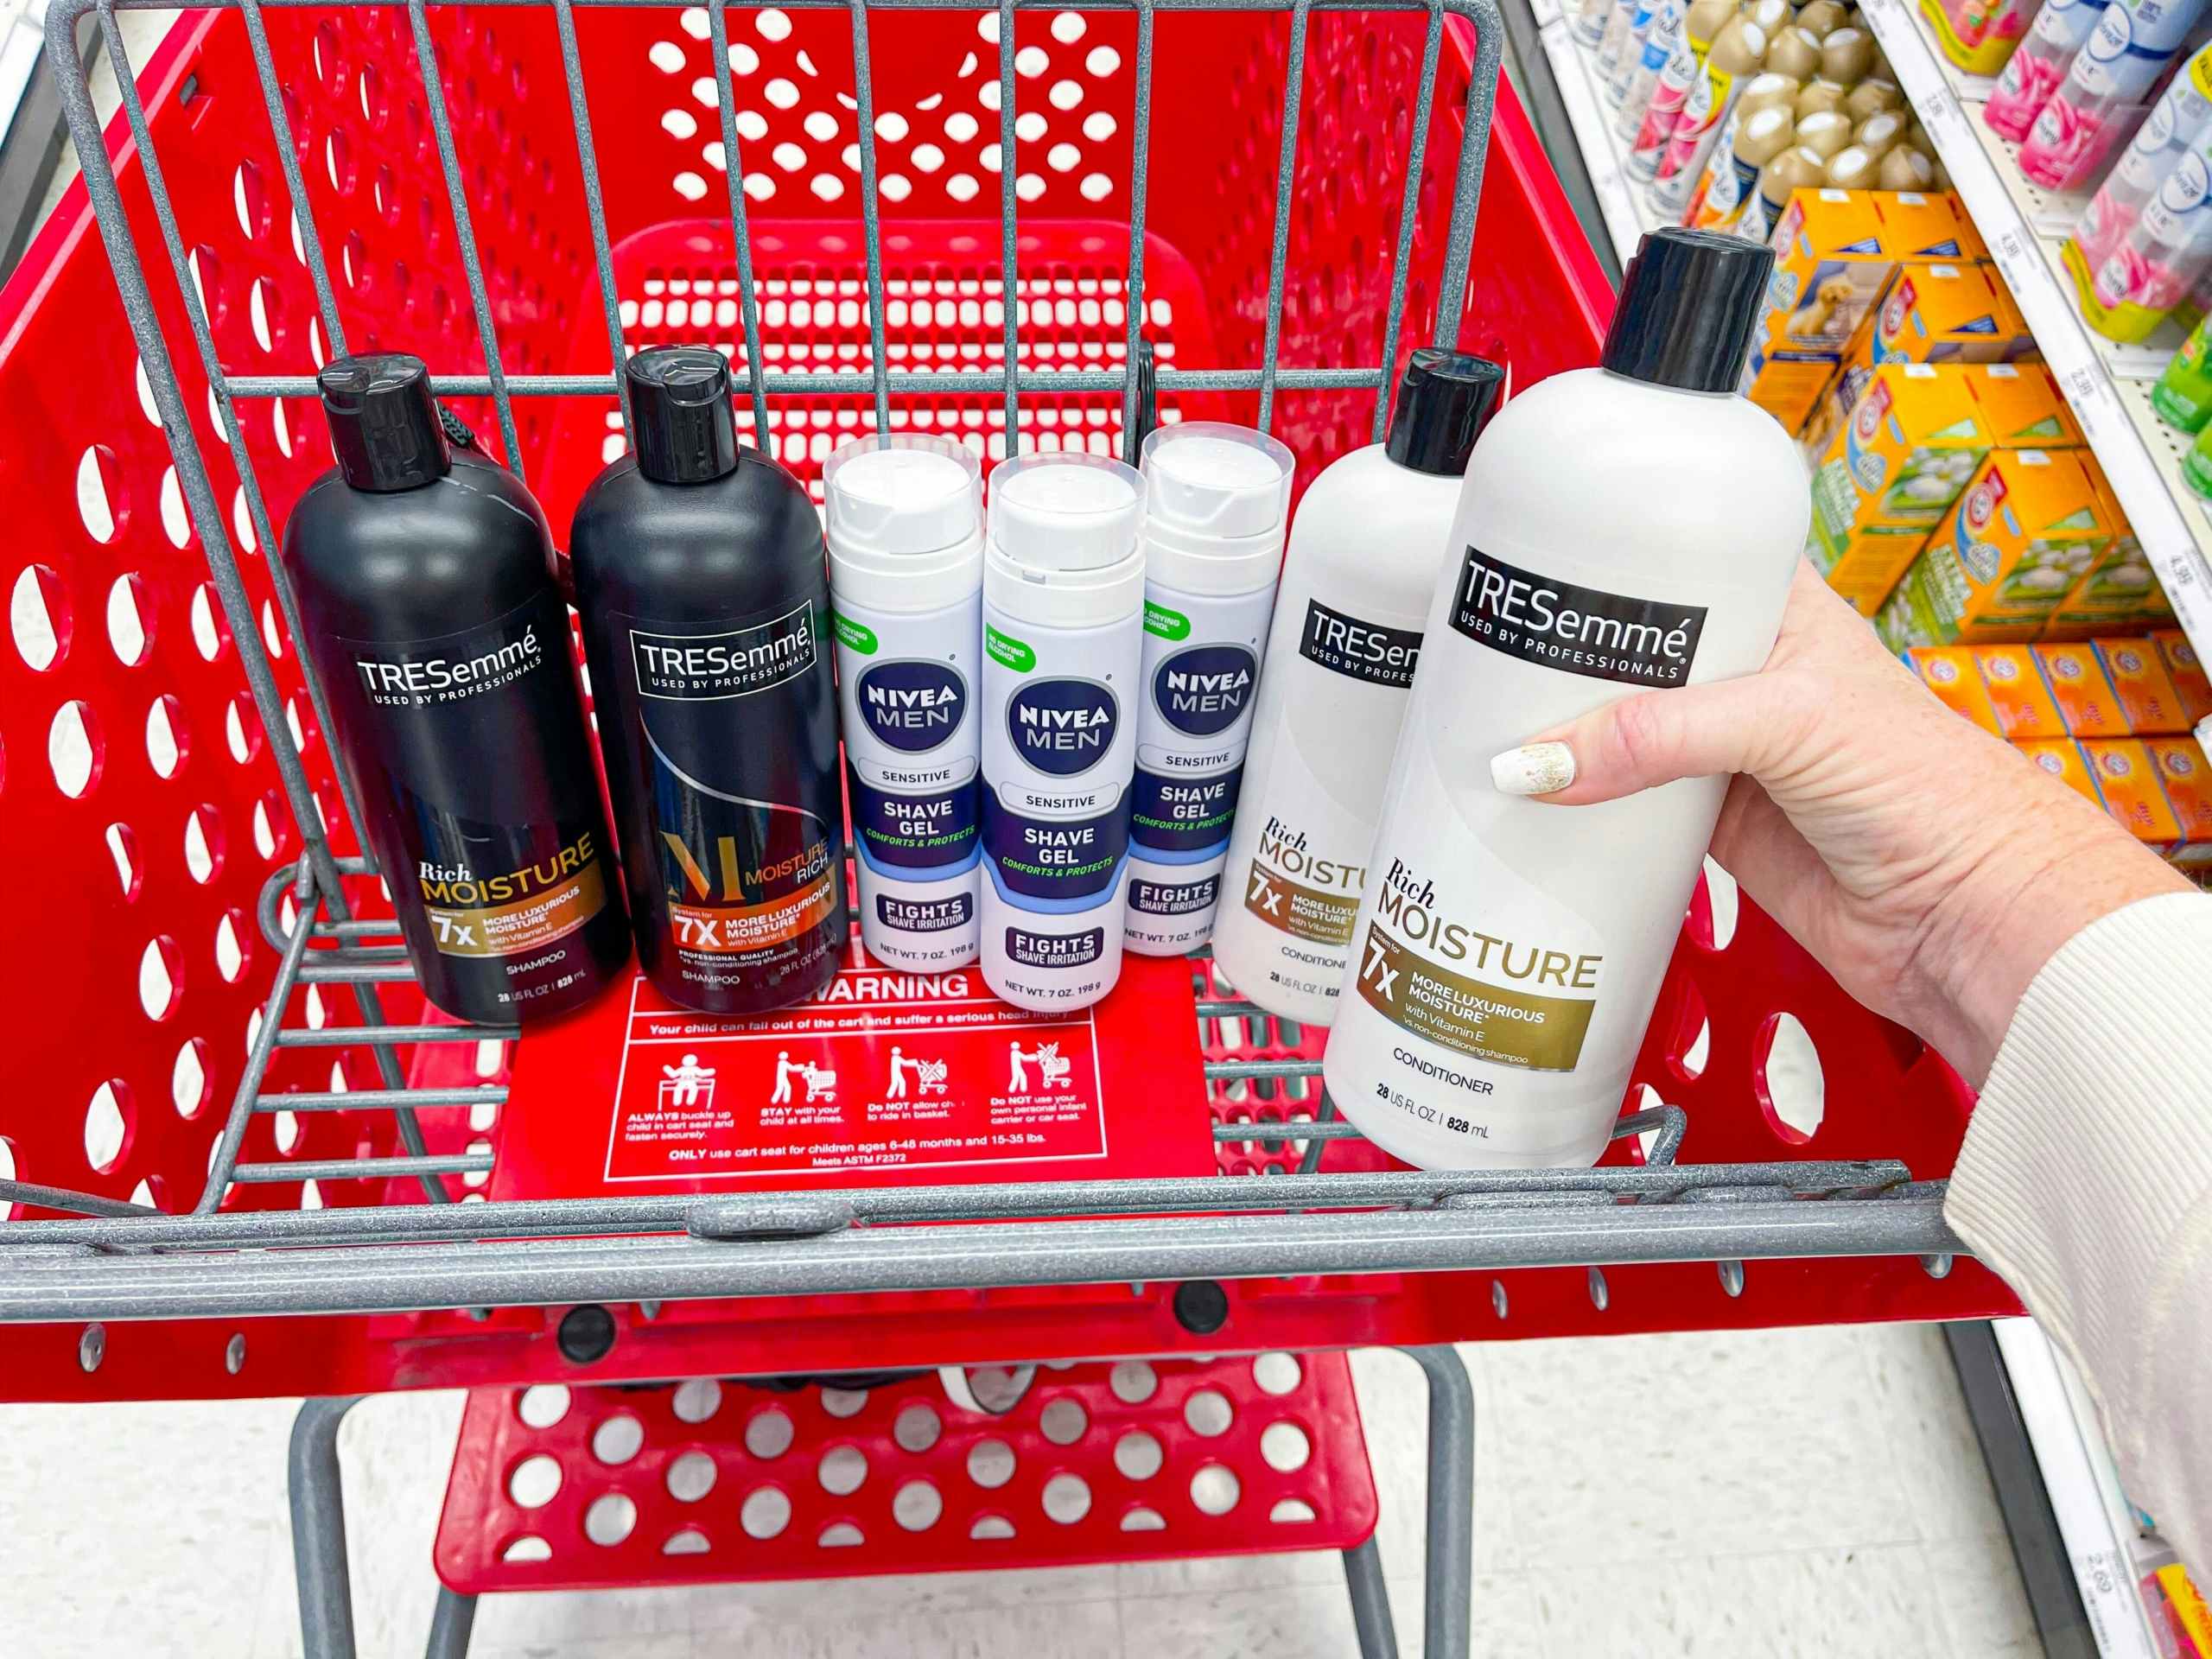 nivea shave gel and tresemme hair care in a target cart